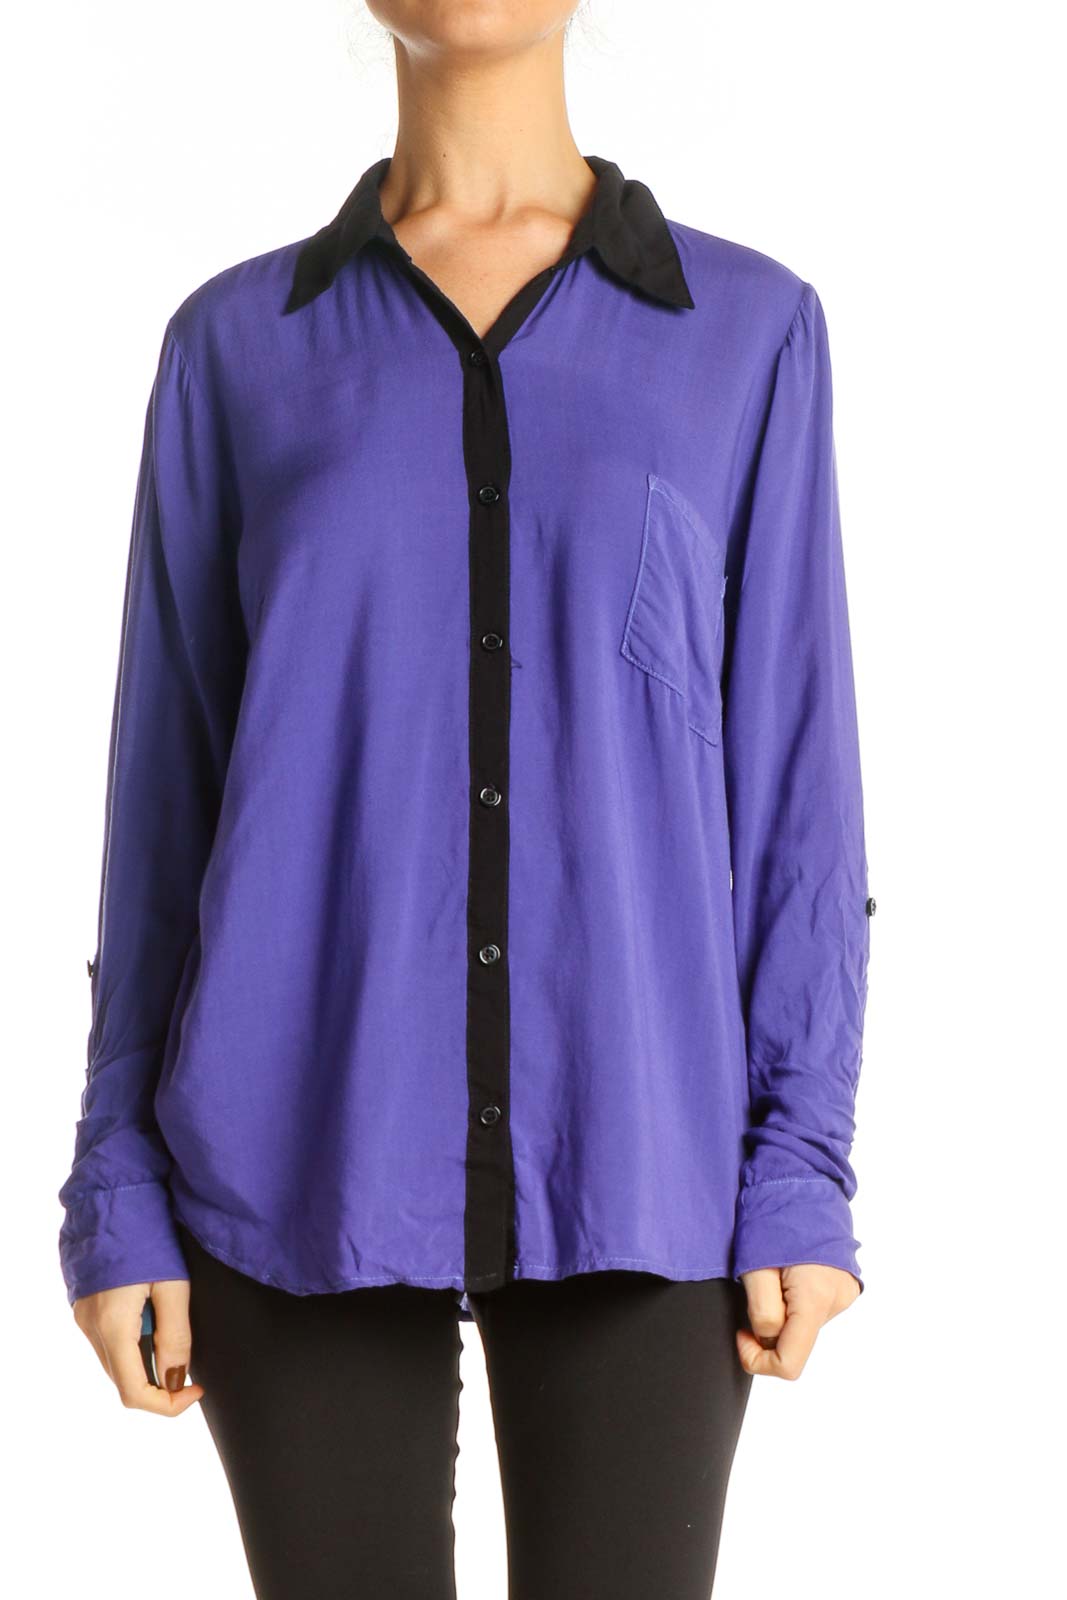 Purple Solid Formal Shirt Front